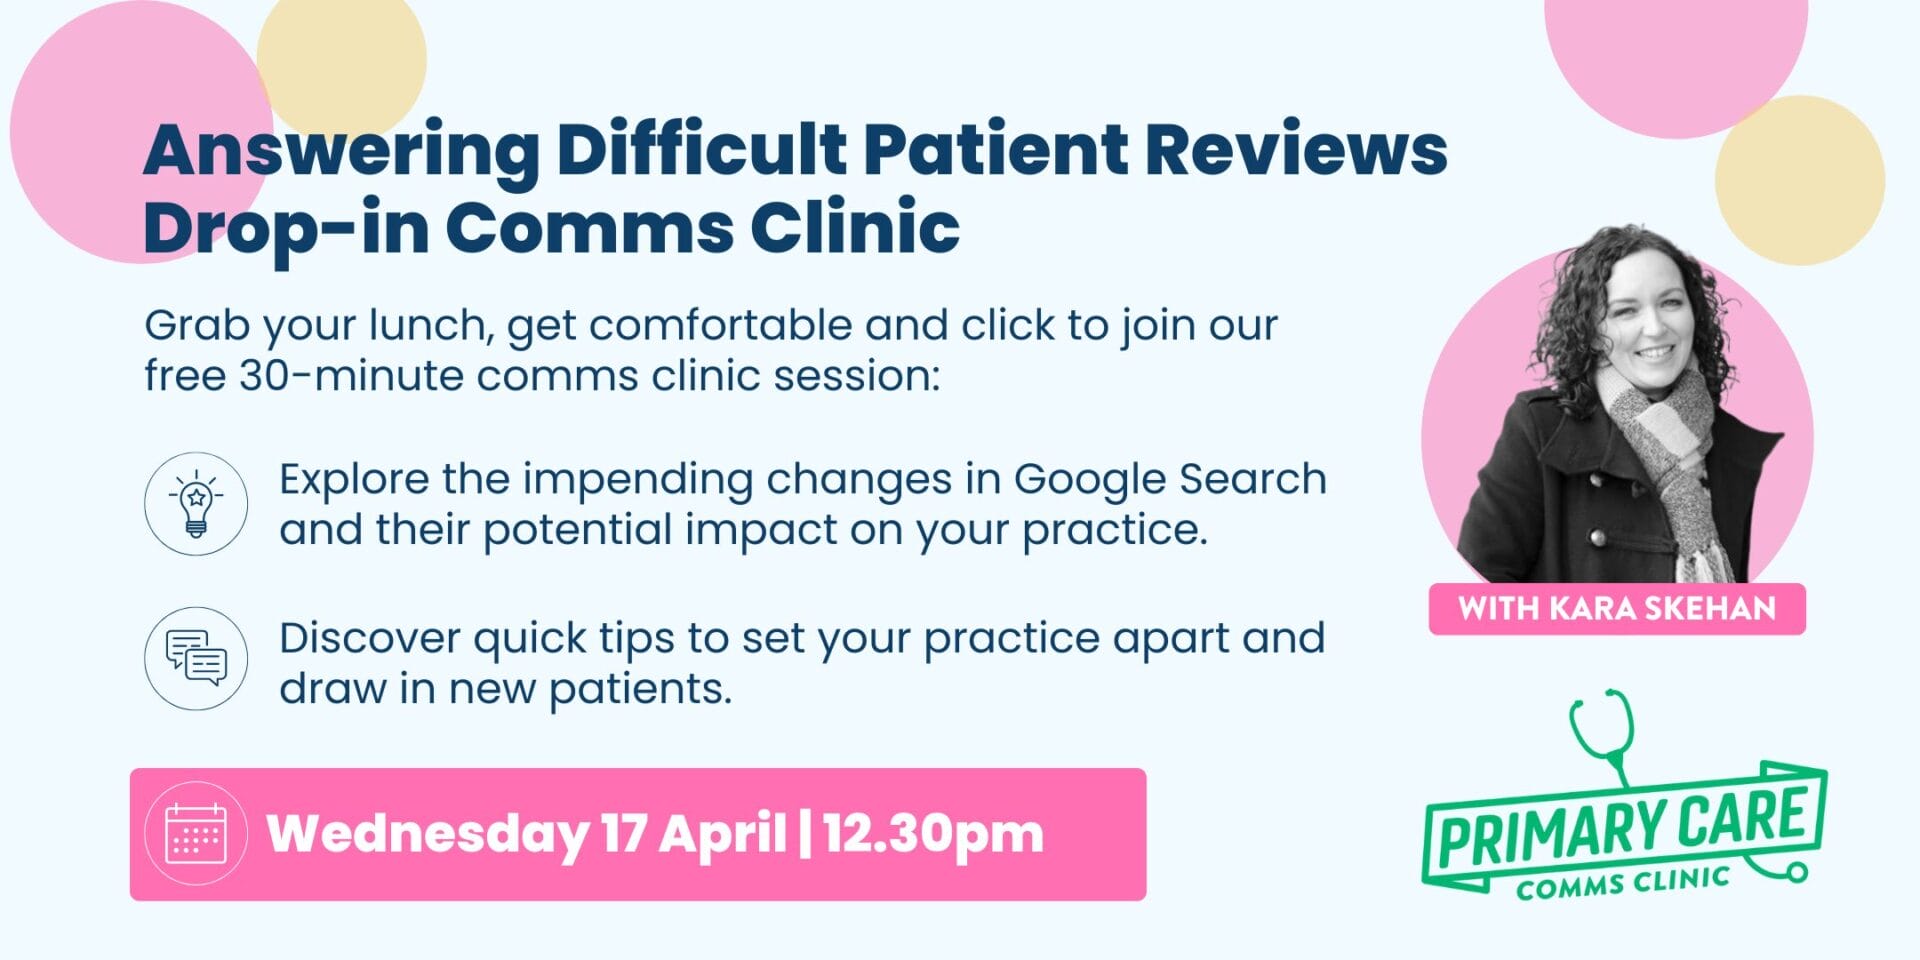 Drop-in Comms Clinic: Answering Difficult Patient Reviews